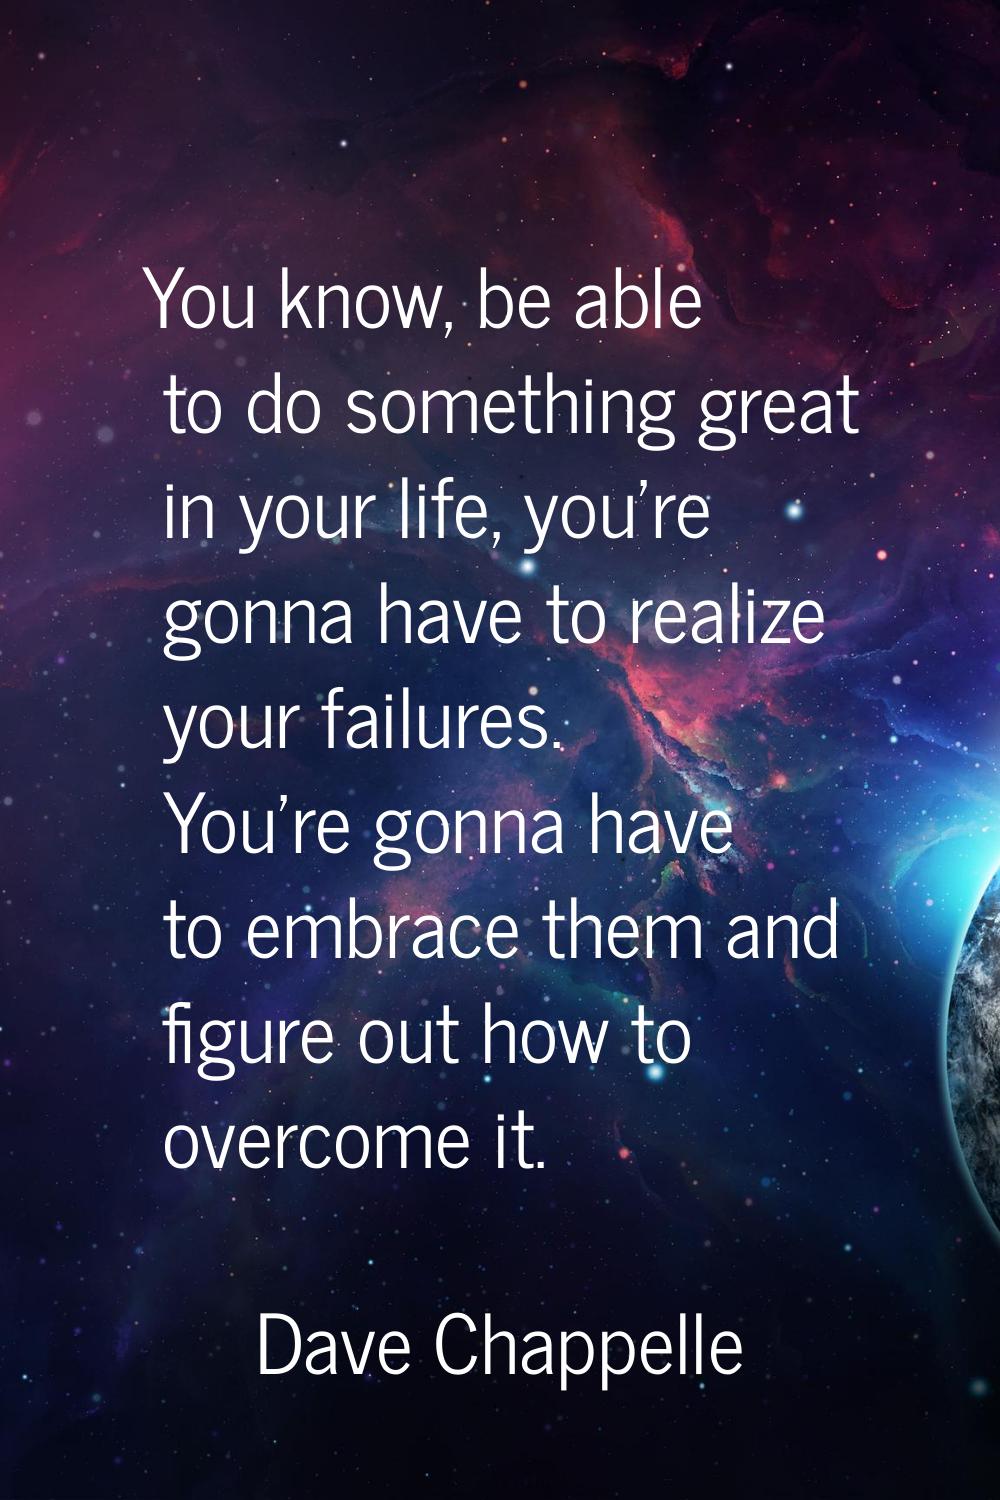 You know, be able to do something great in your life, you're gonna have to realize your failures. Y